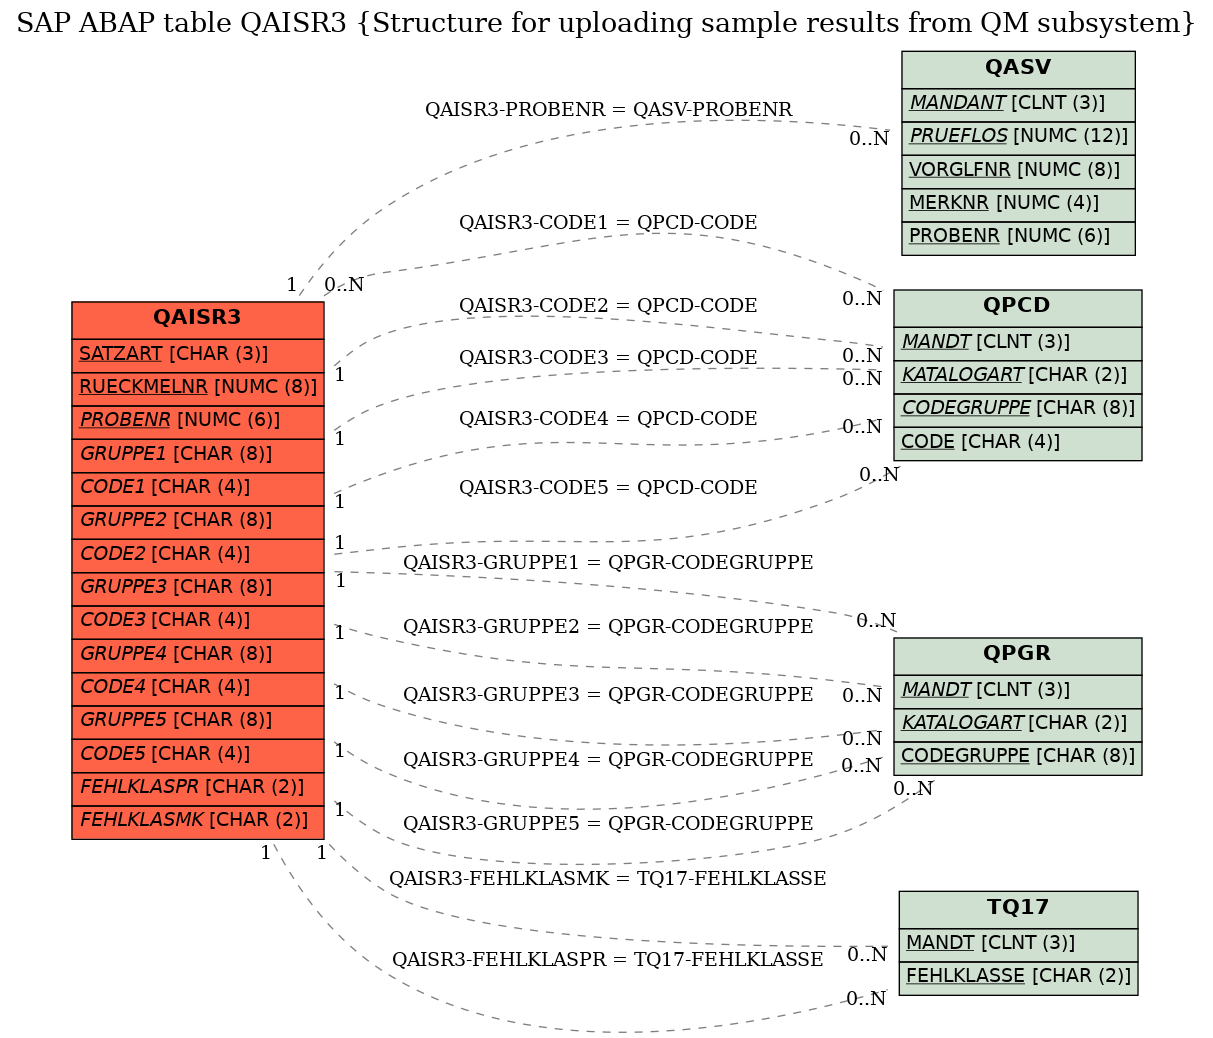 E-R Diagram for table QAISR3 (Structure for uploading sample results from QM subsystem)